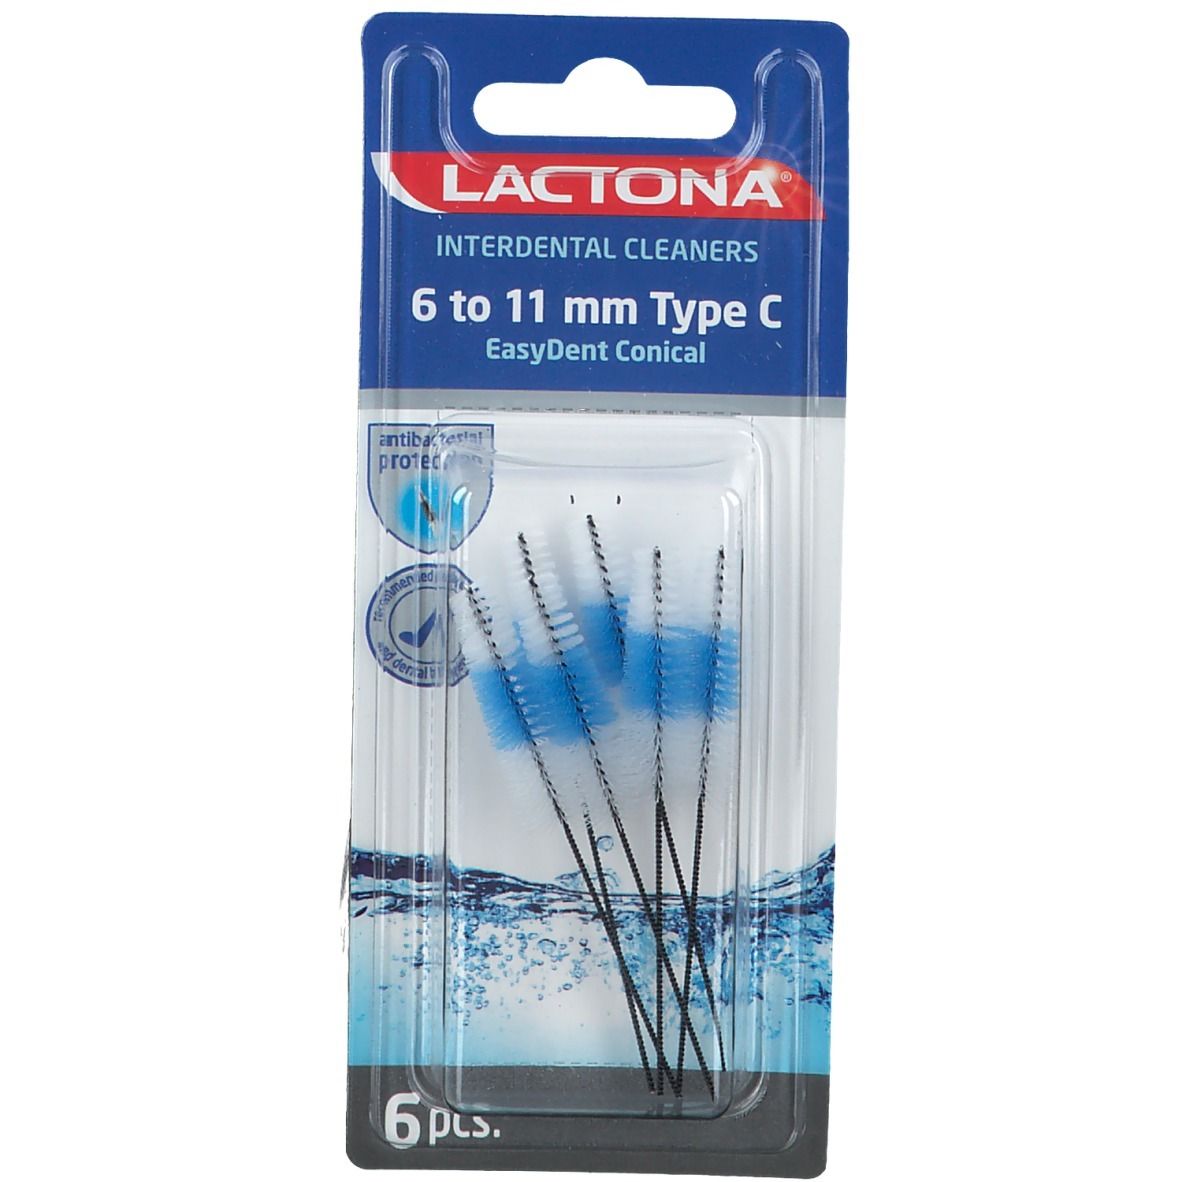 Image of LACTONA Interdentaire Cleaners EasyDent Brosse 6- 11mm